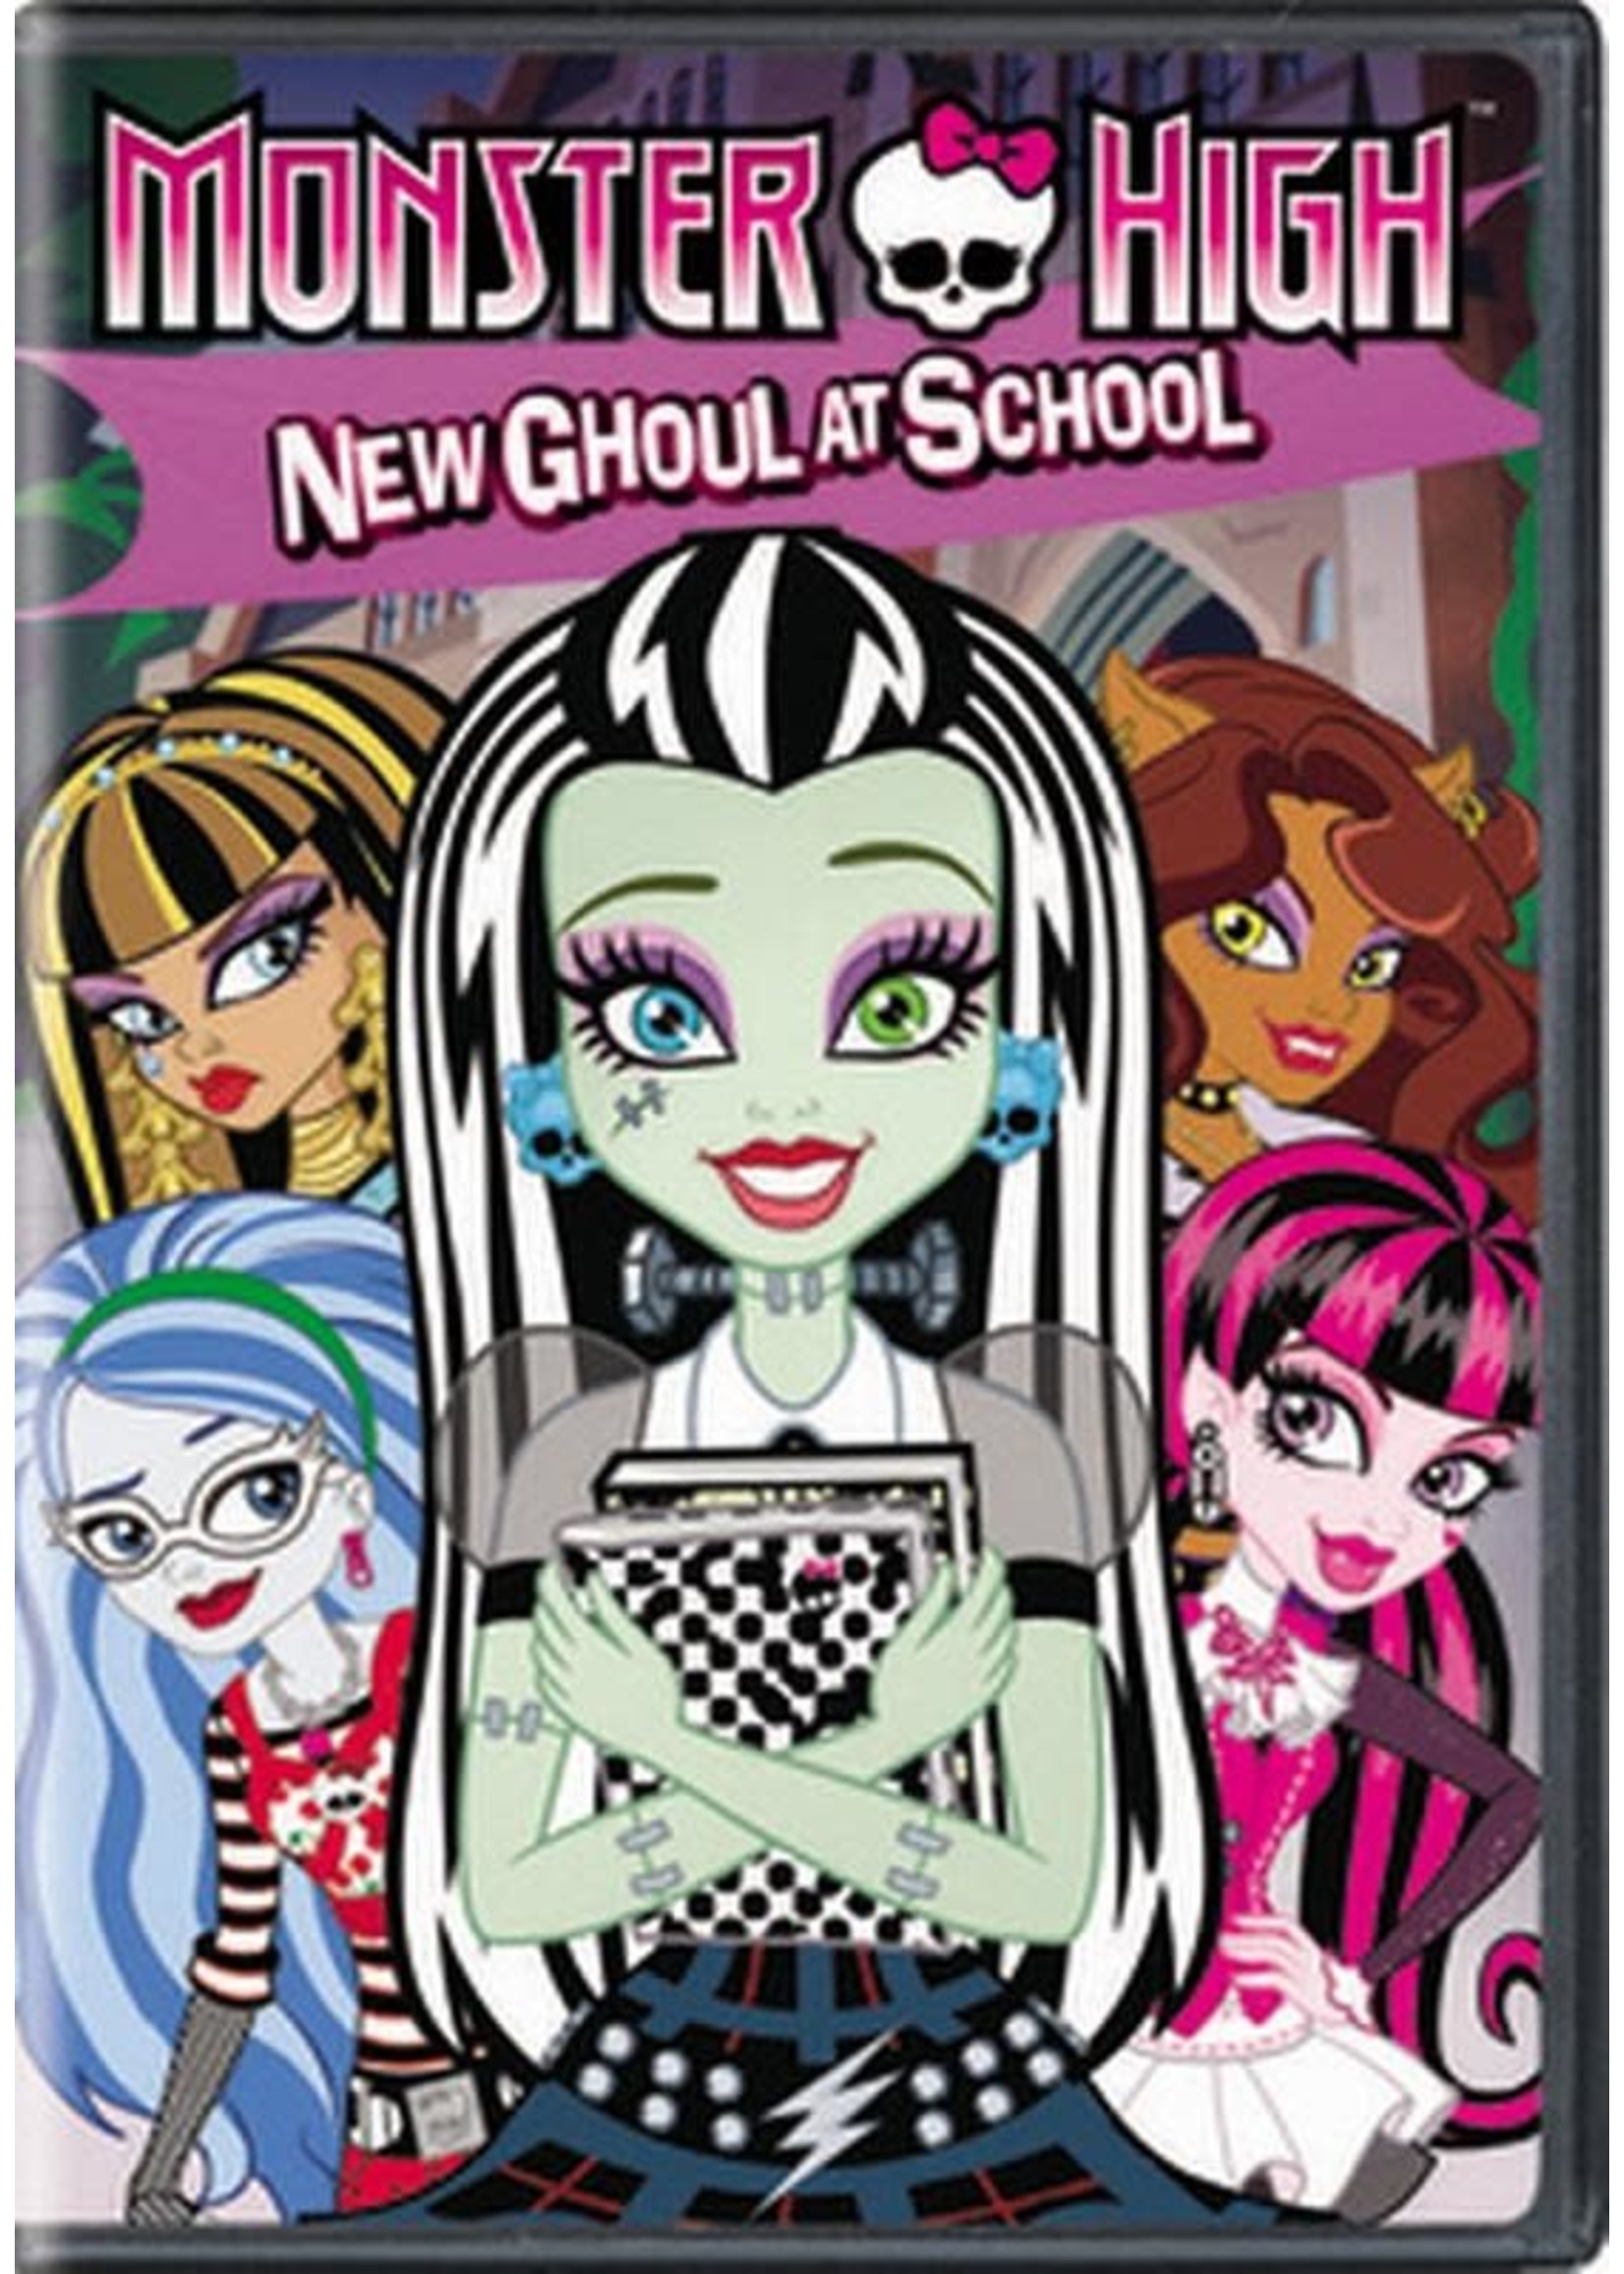 Monster High: New Ghoul at School (DVD)